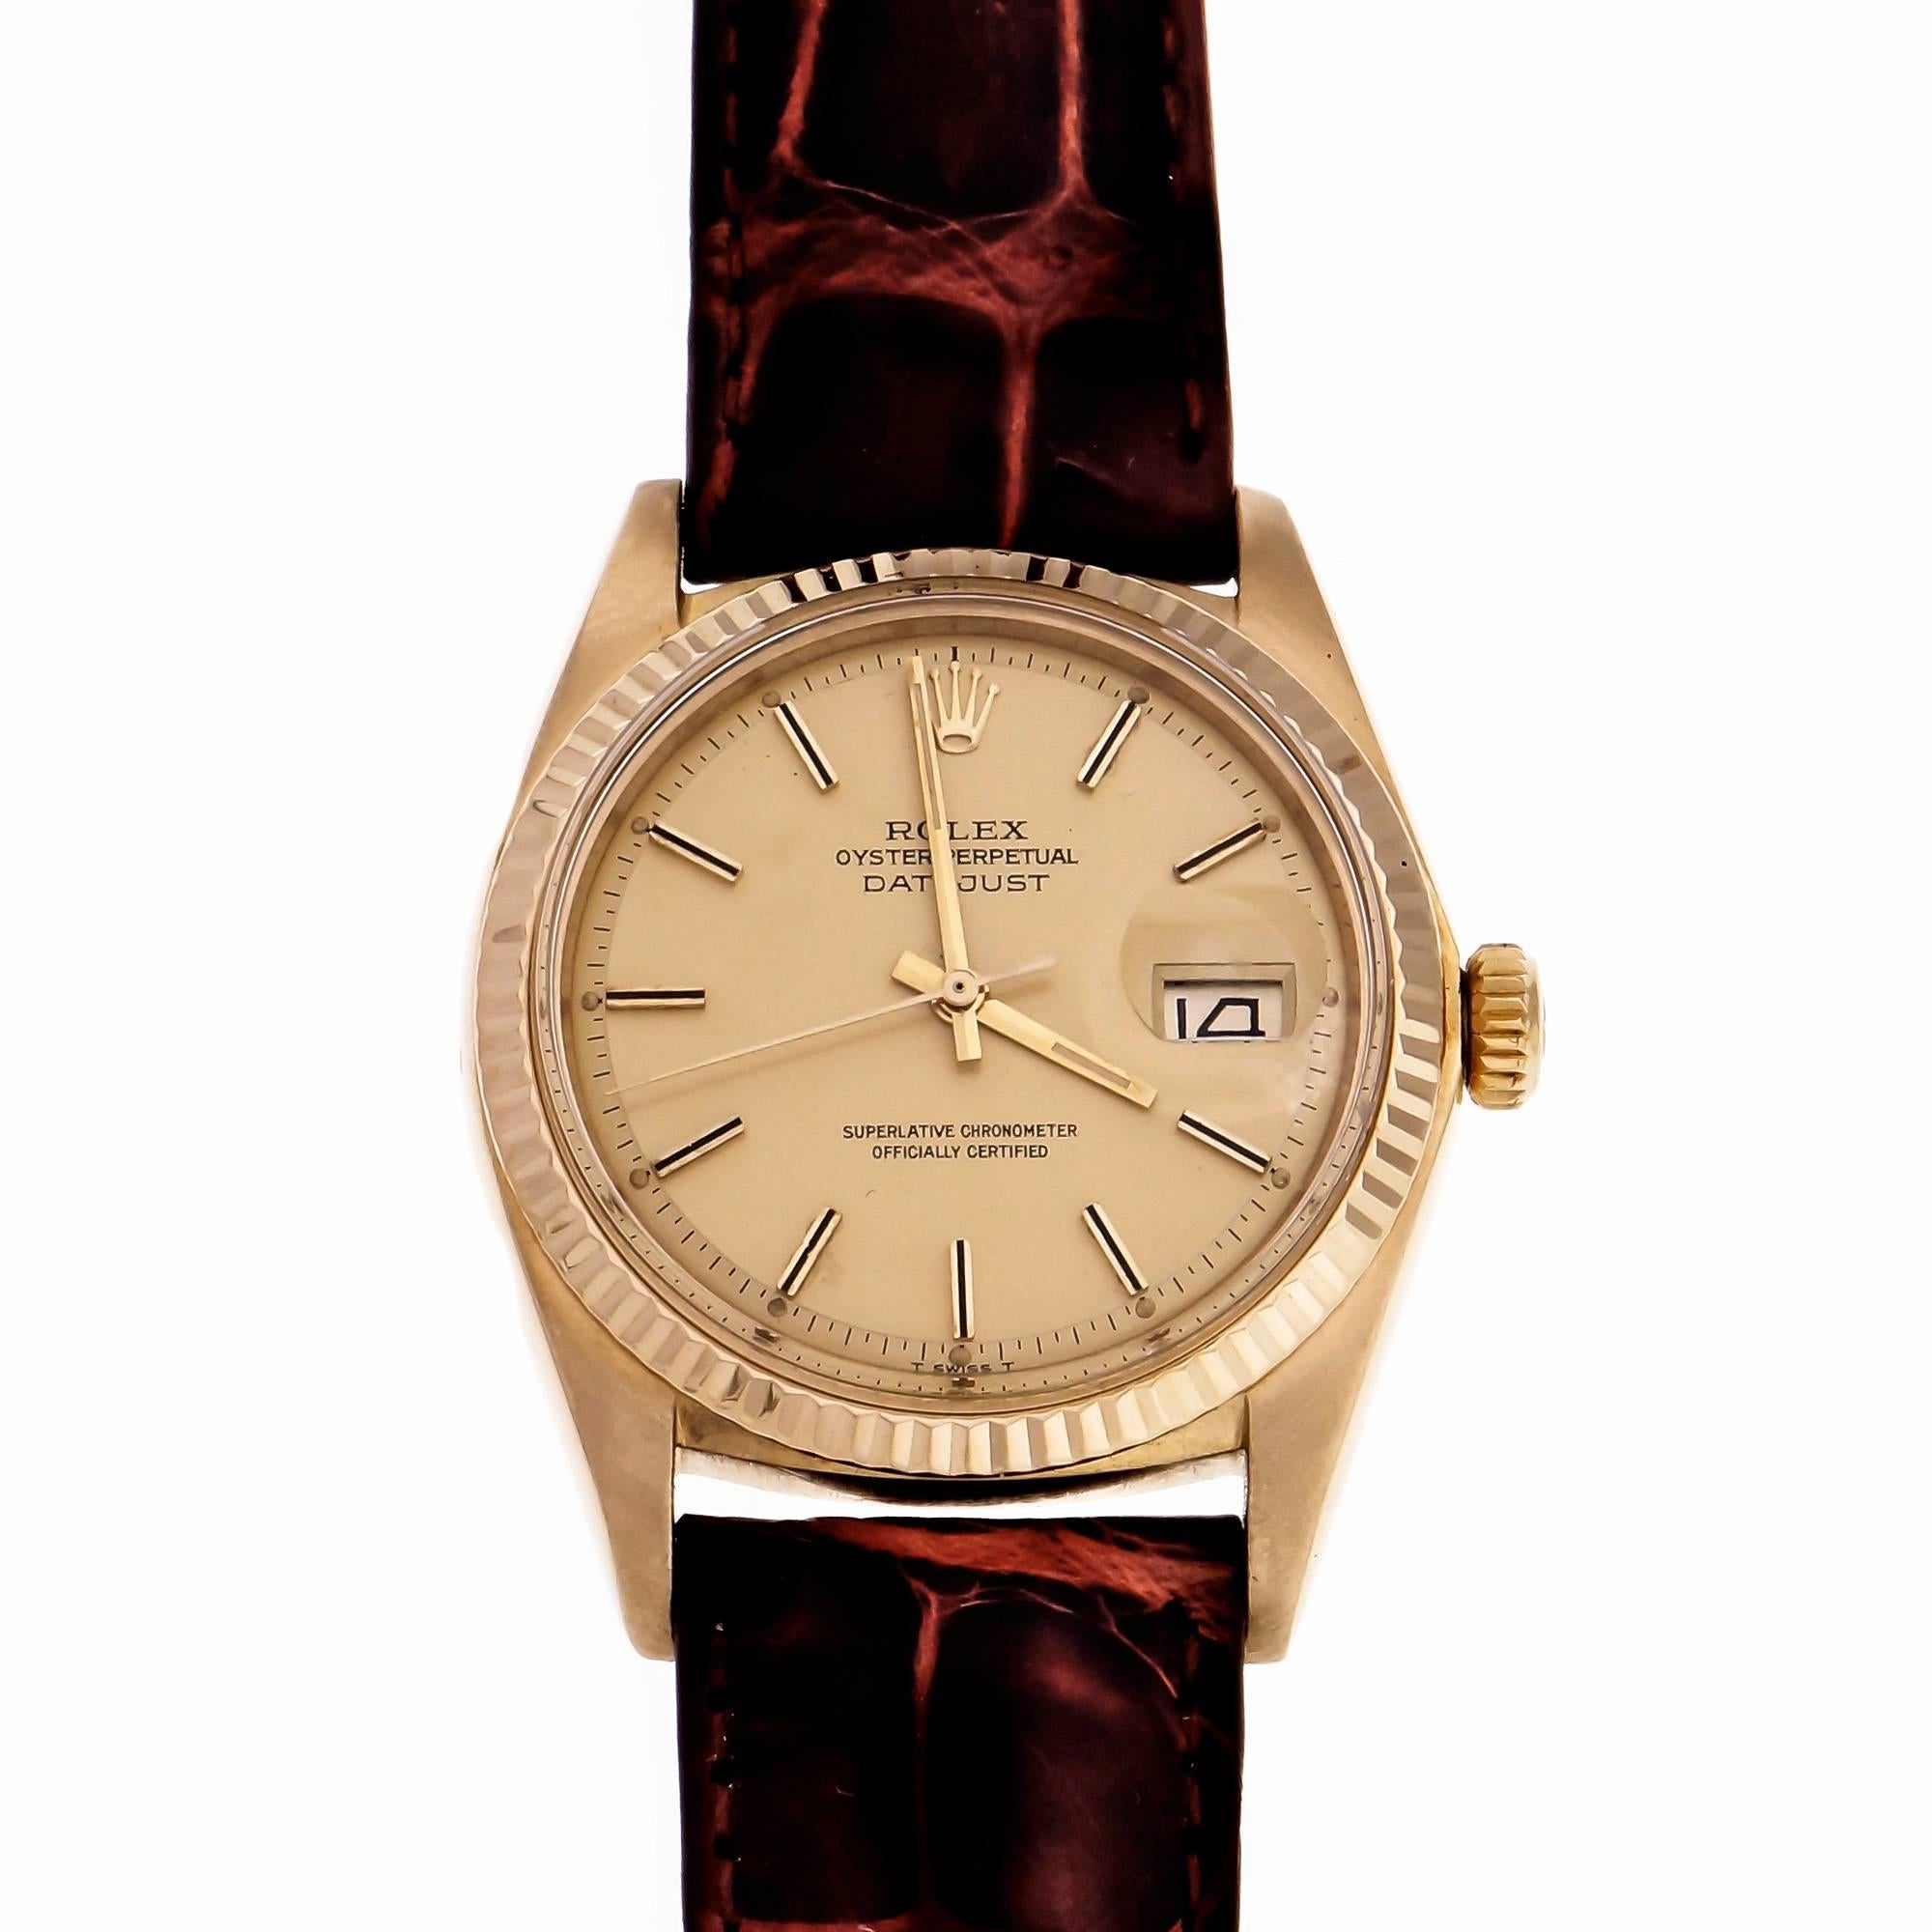 18k yellow gold Rolex Datejust Model 1601 circa 1970 collector’s quality with factory original pie pan dial and Rolex 18k yellow gold buckle. New Italian alligator band.  

14k yellow gold 
62.1 grams 
Length: 44mm 
Width: 36mm 
Band width at case: